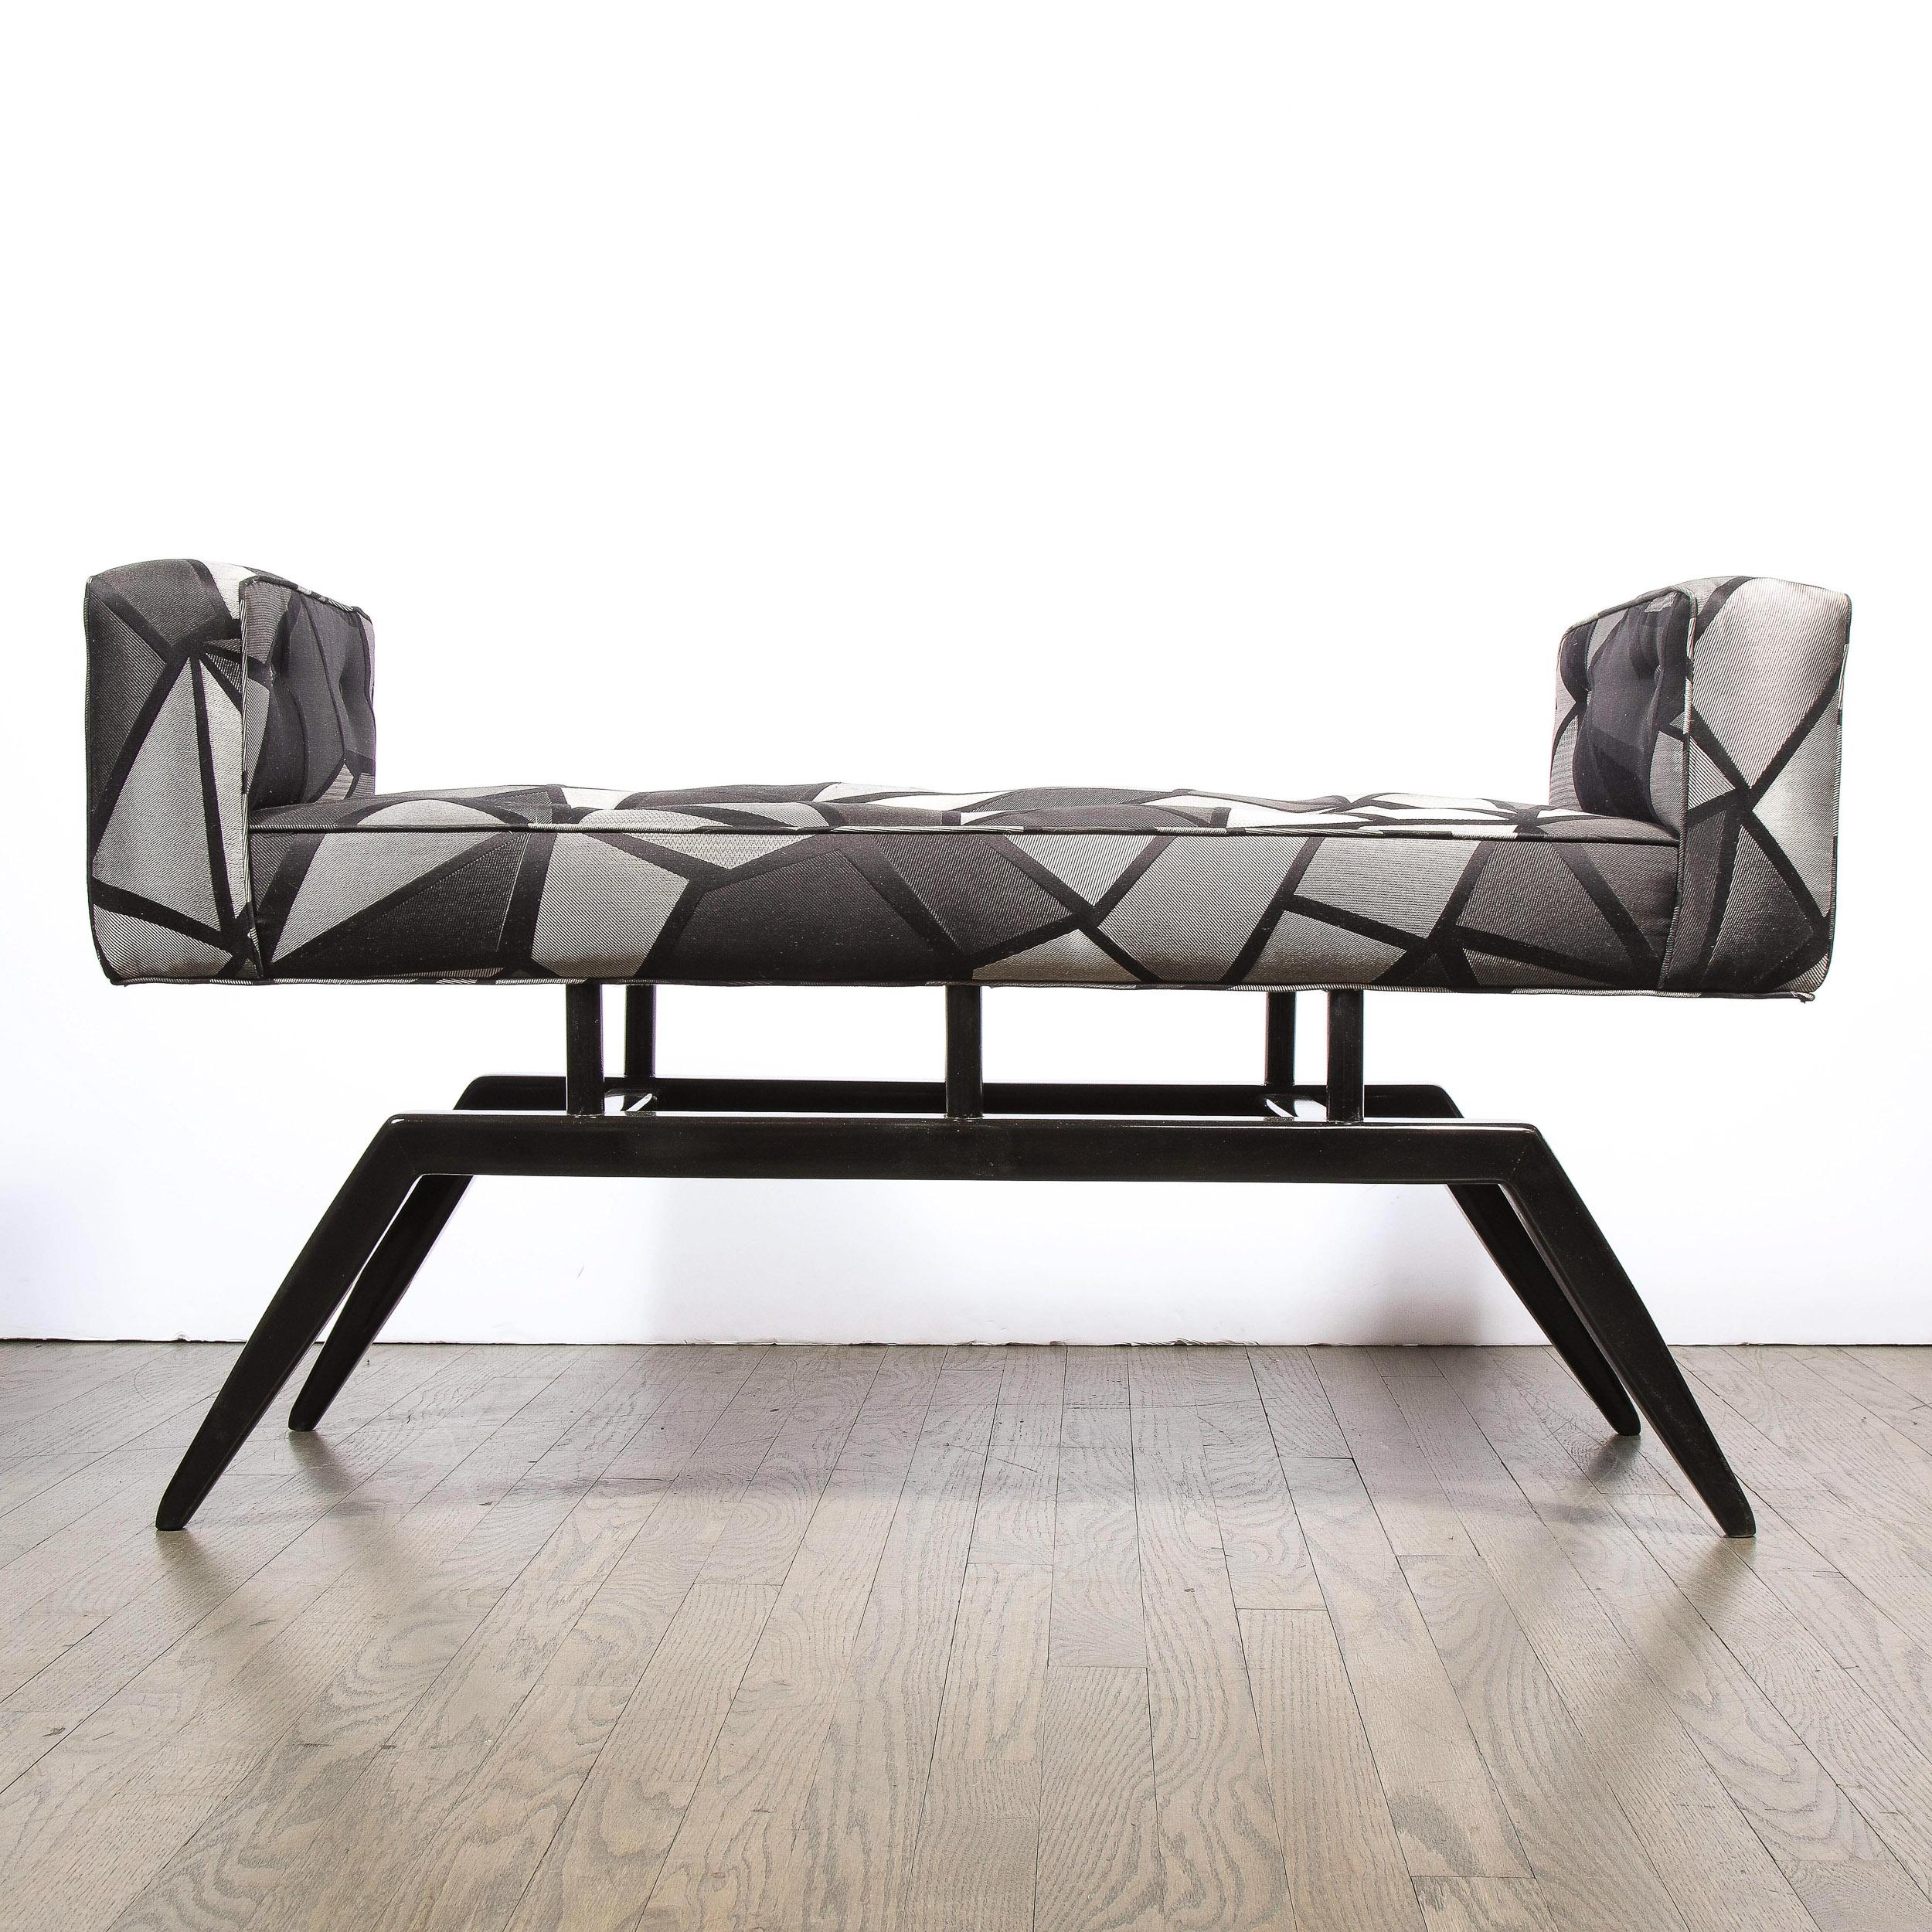 This sophisticated pair of Mid Century Modern 